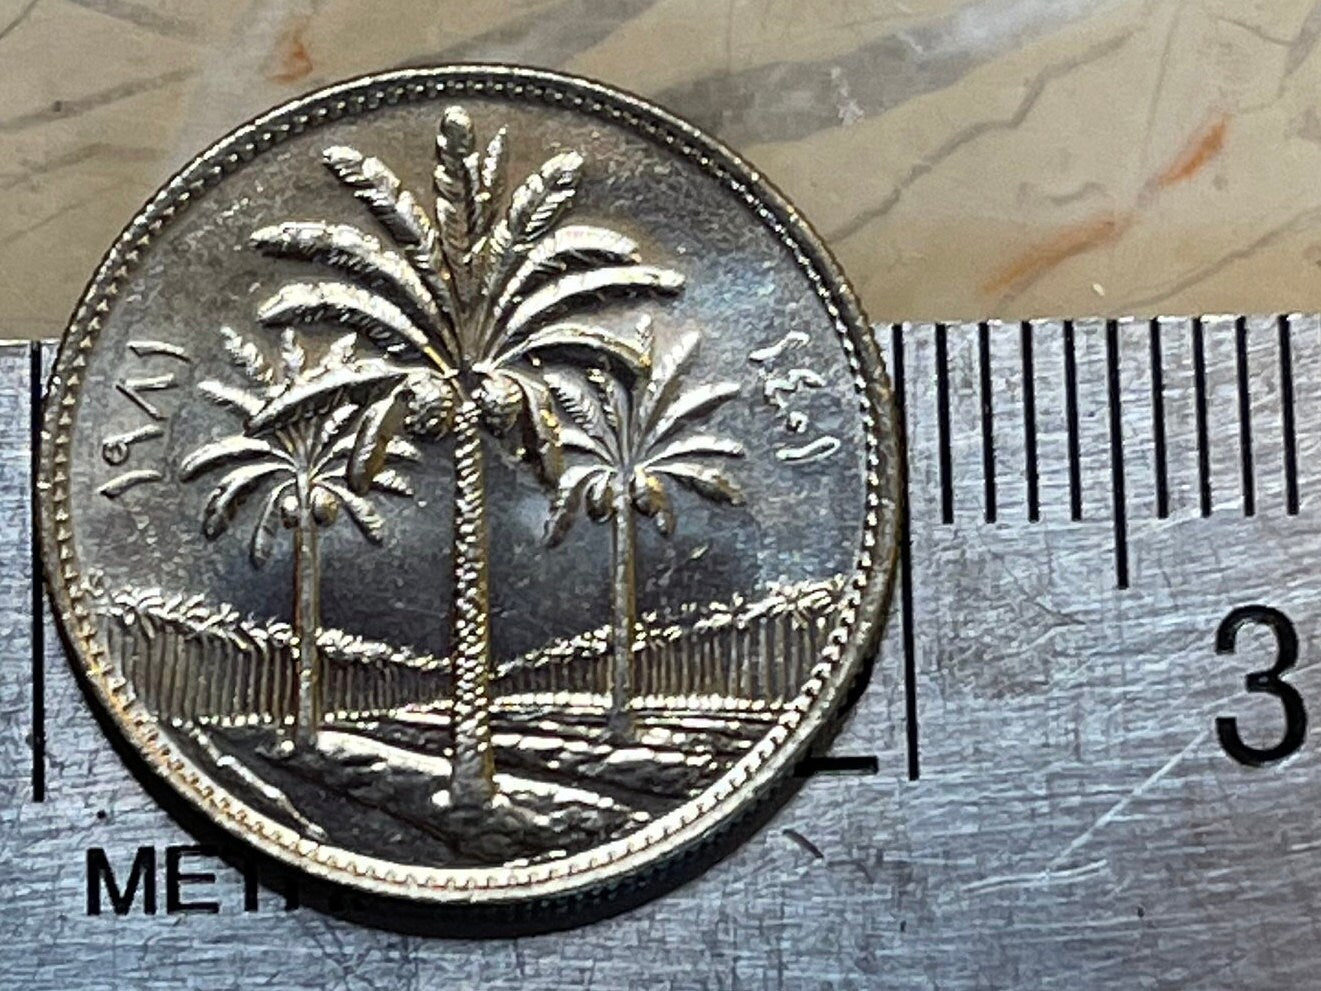 Date Palm Trees 25 Fils Iraq Authentic Coin Money for Jewelry and Craft Making